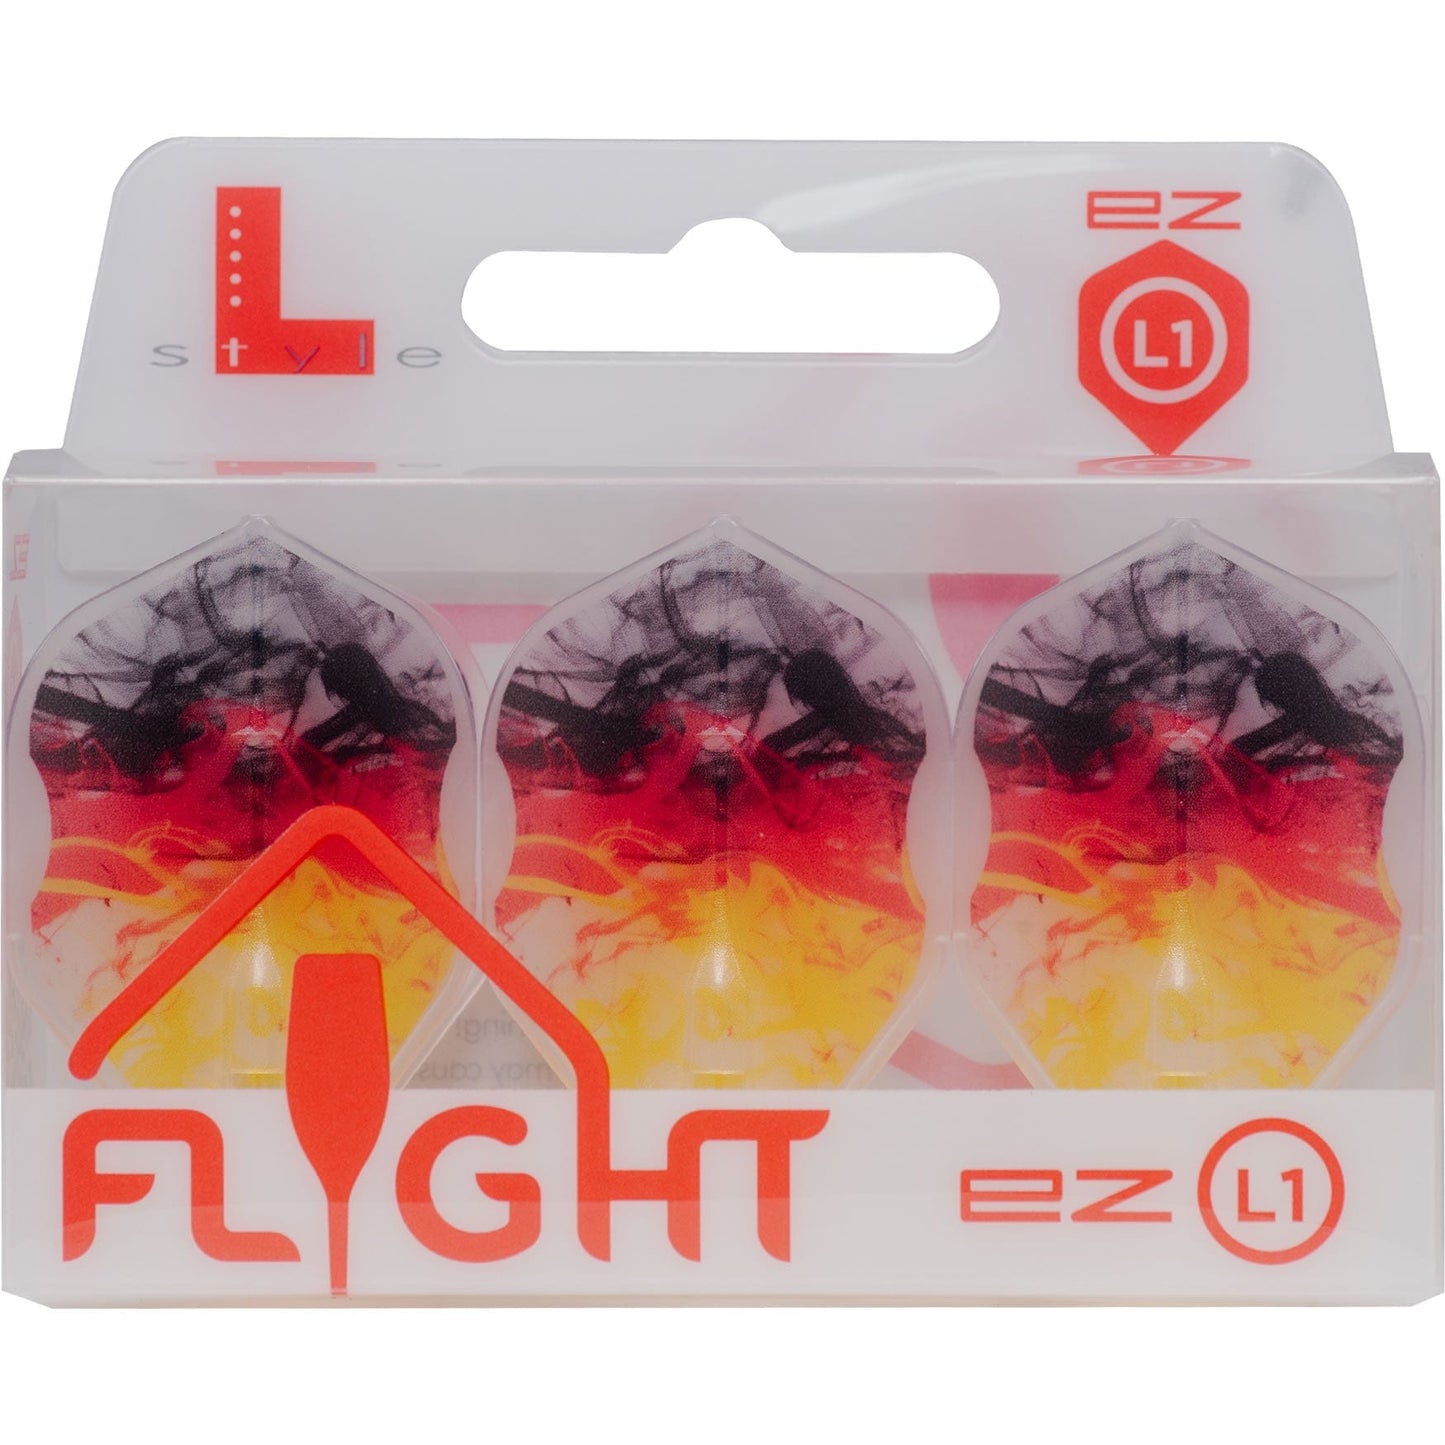 L-Style - EZ L-Flights - Integrated Champagne Ring - L1EZ - RYB Series v1 - Type D - Clear White